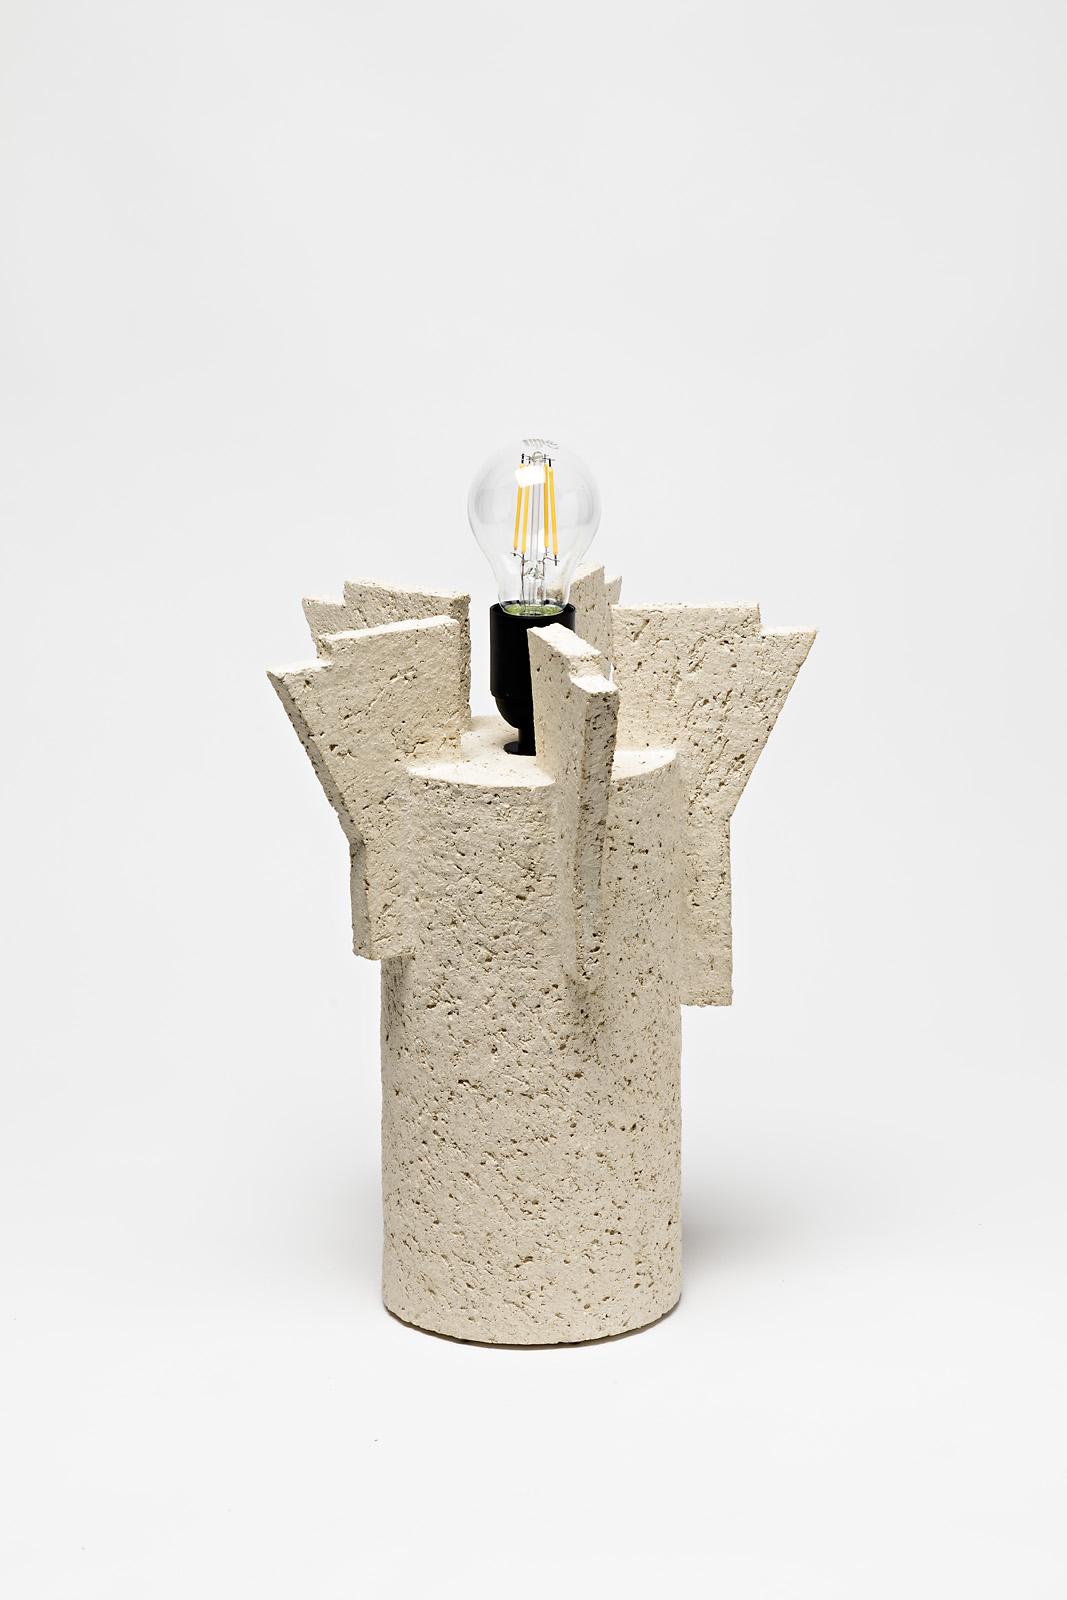 Ceramic Table Lamp by Denis Castaing with Brown Glaze Decoration, 2019 For Sale 1